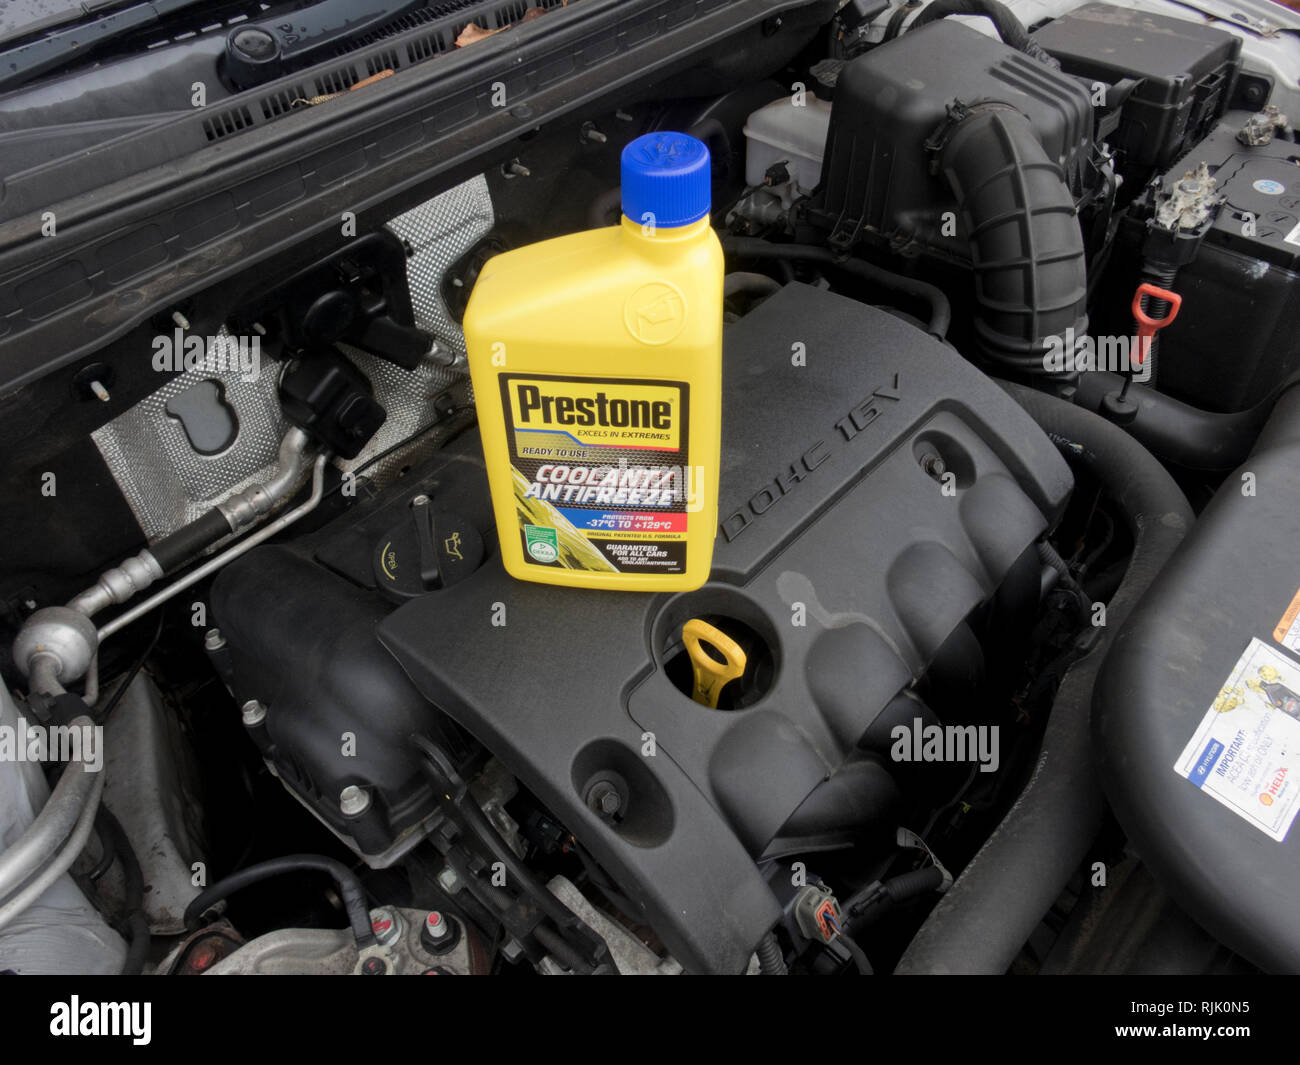 Prestone Engine Coolant or Anti Freeze on Top of a Car Engine Stock Photo